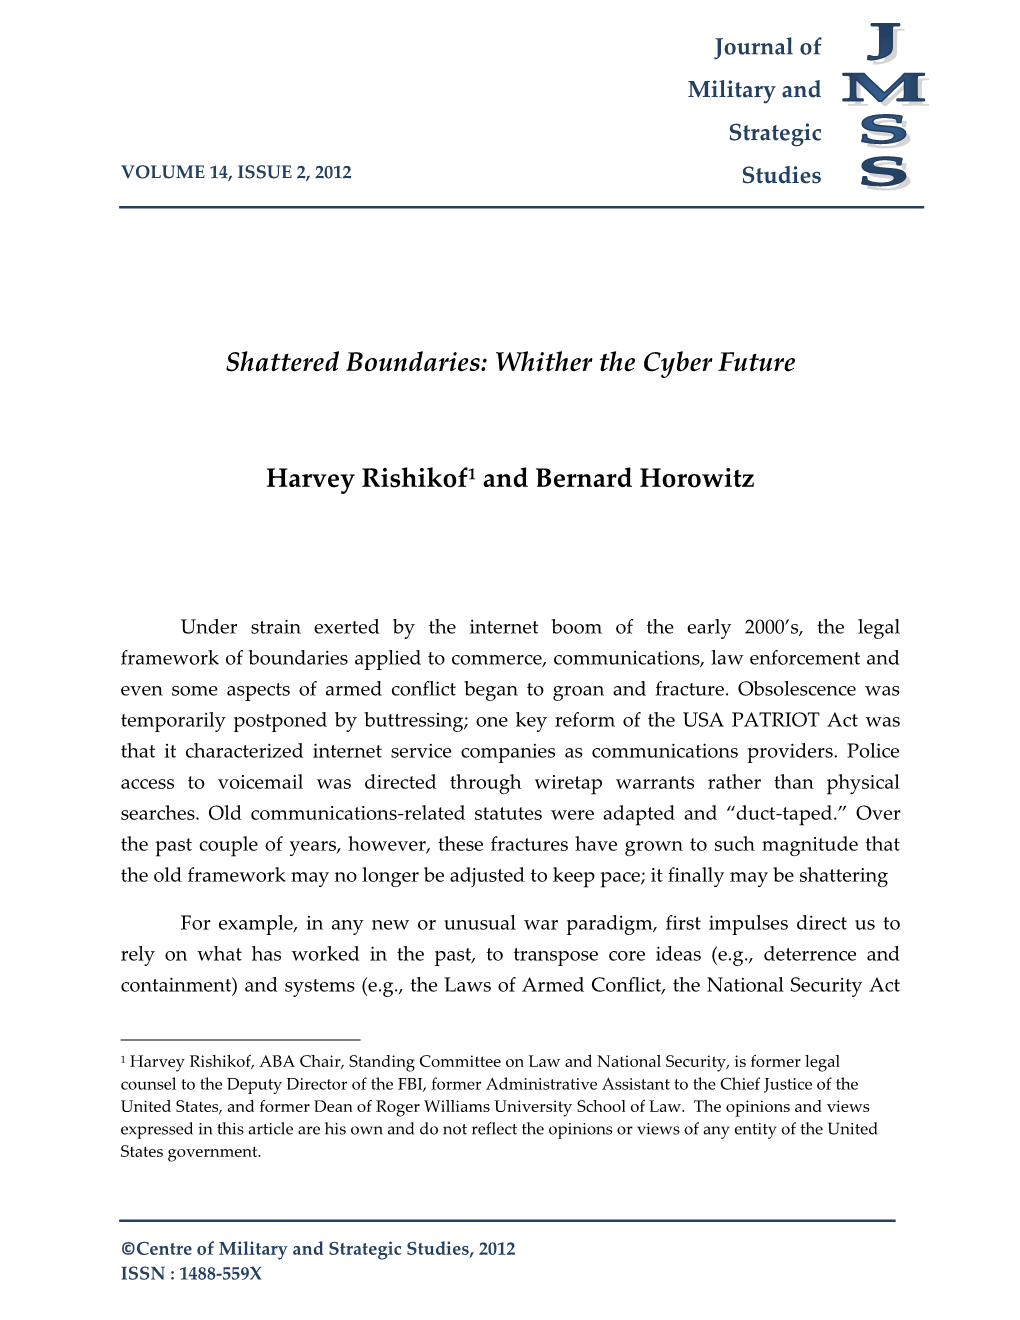 Shattered Boundaries: Whither the Cyber Future Harvey Rishikof1 And